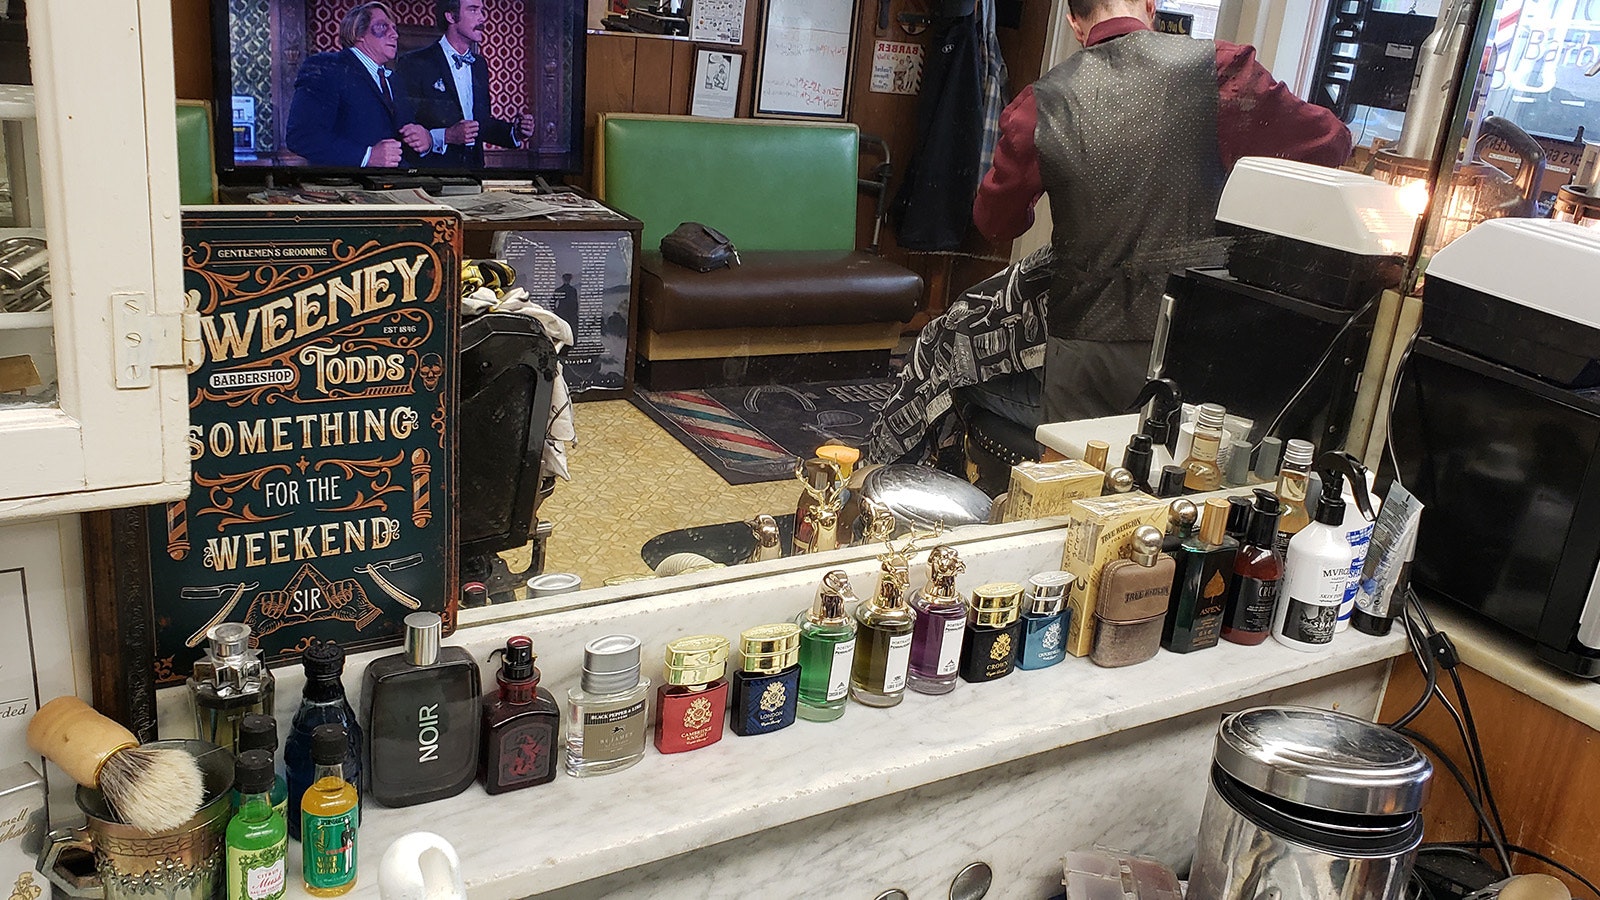 Customers bring old Avon bottles and shaving cups to display at Kurt's Cuts.